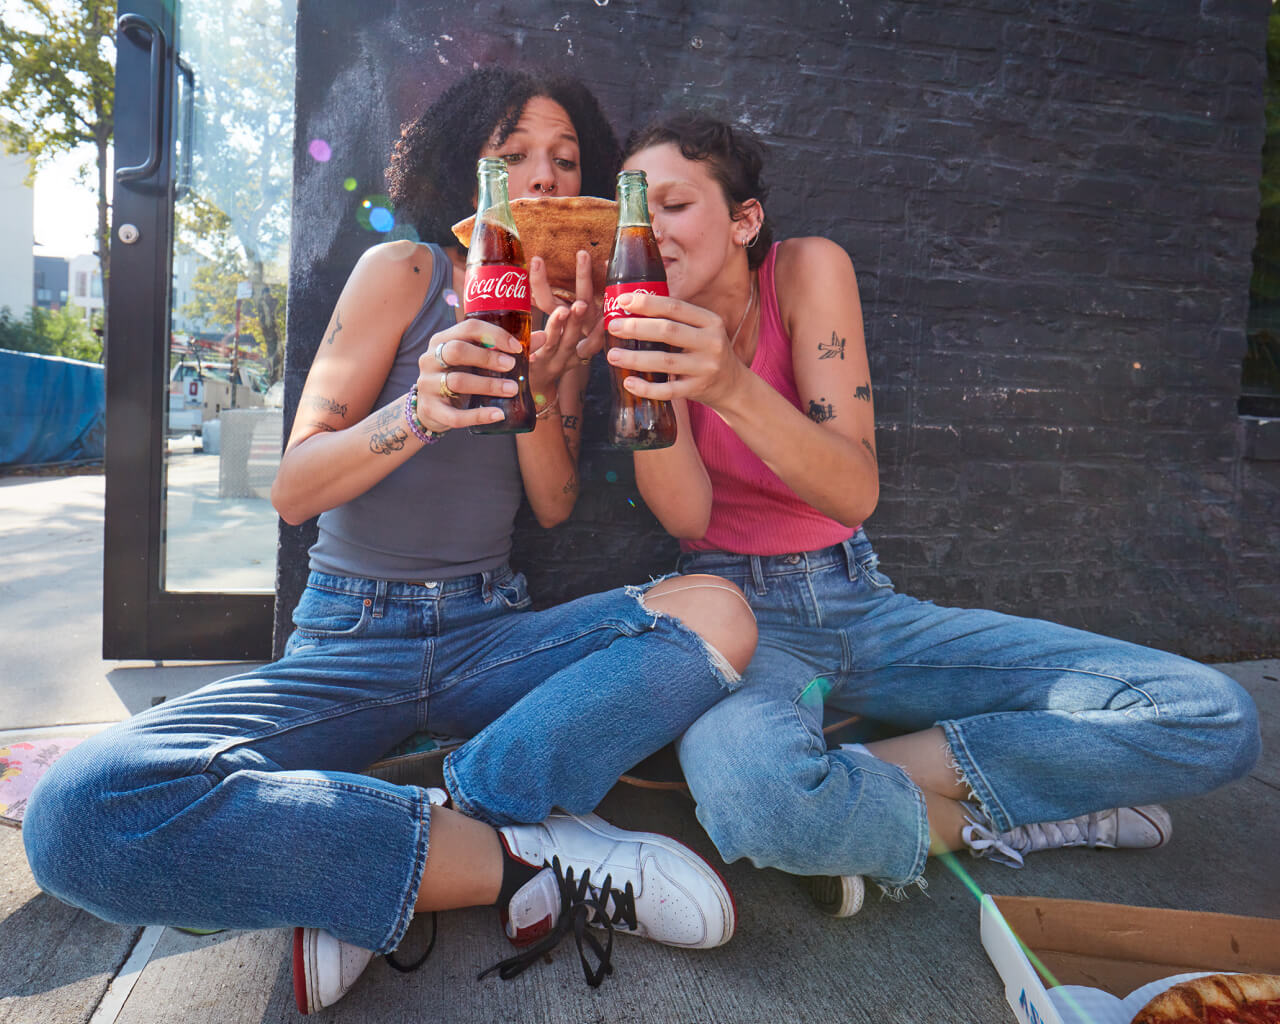 Two women sitting down by a building each holding a Coca-cola